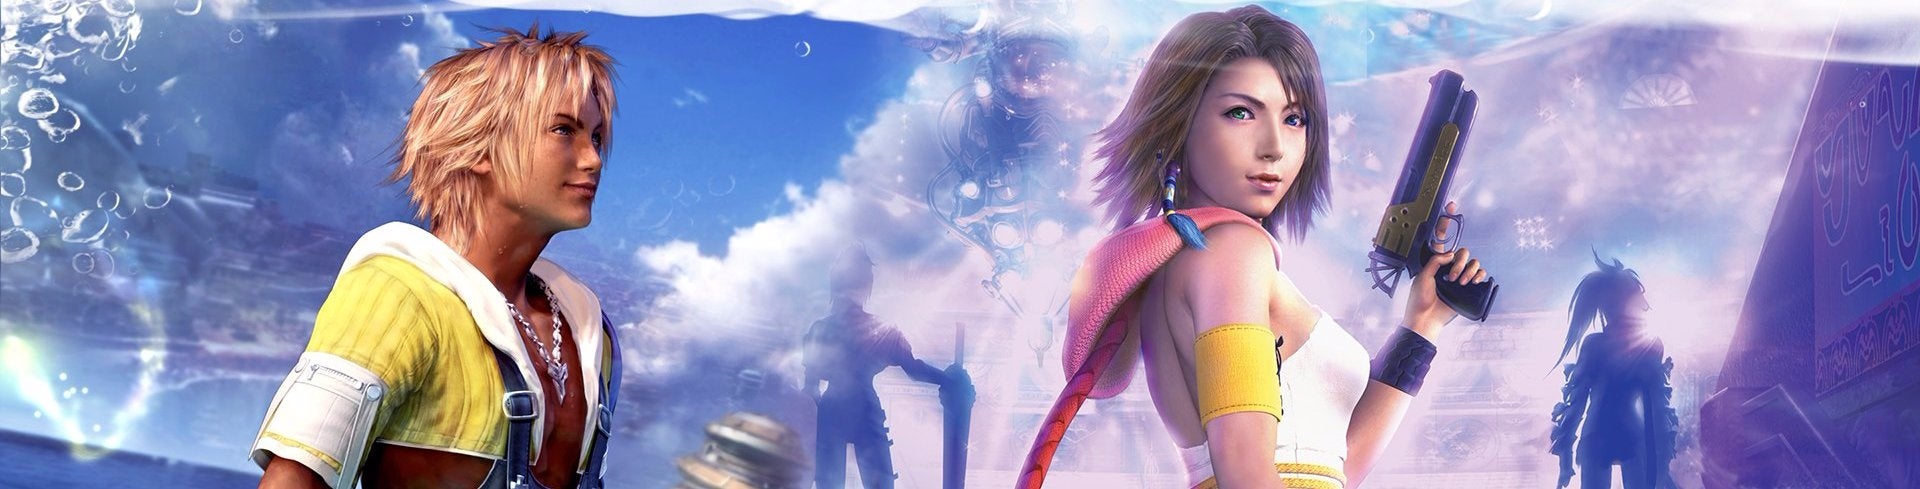 Image for Face-Off: Final Fantasy X/X-2 Remaster on PS4